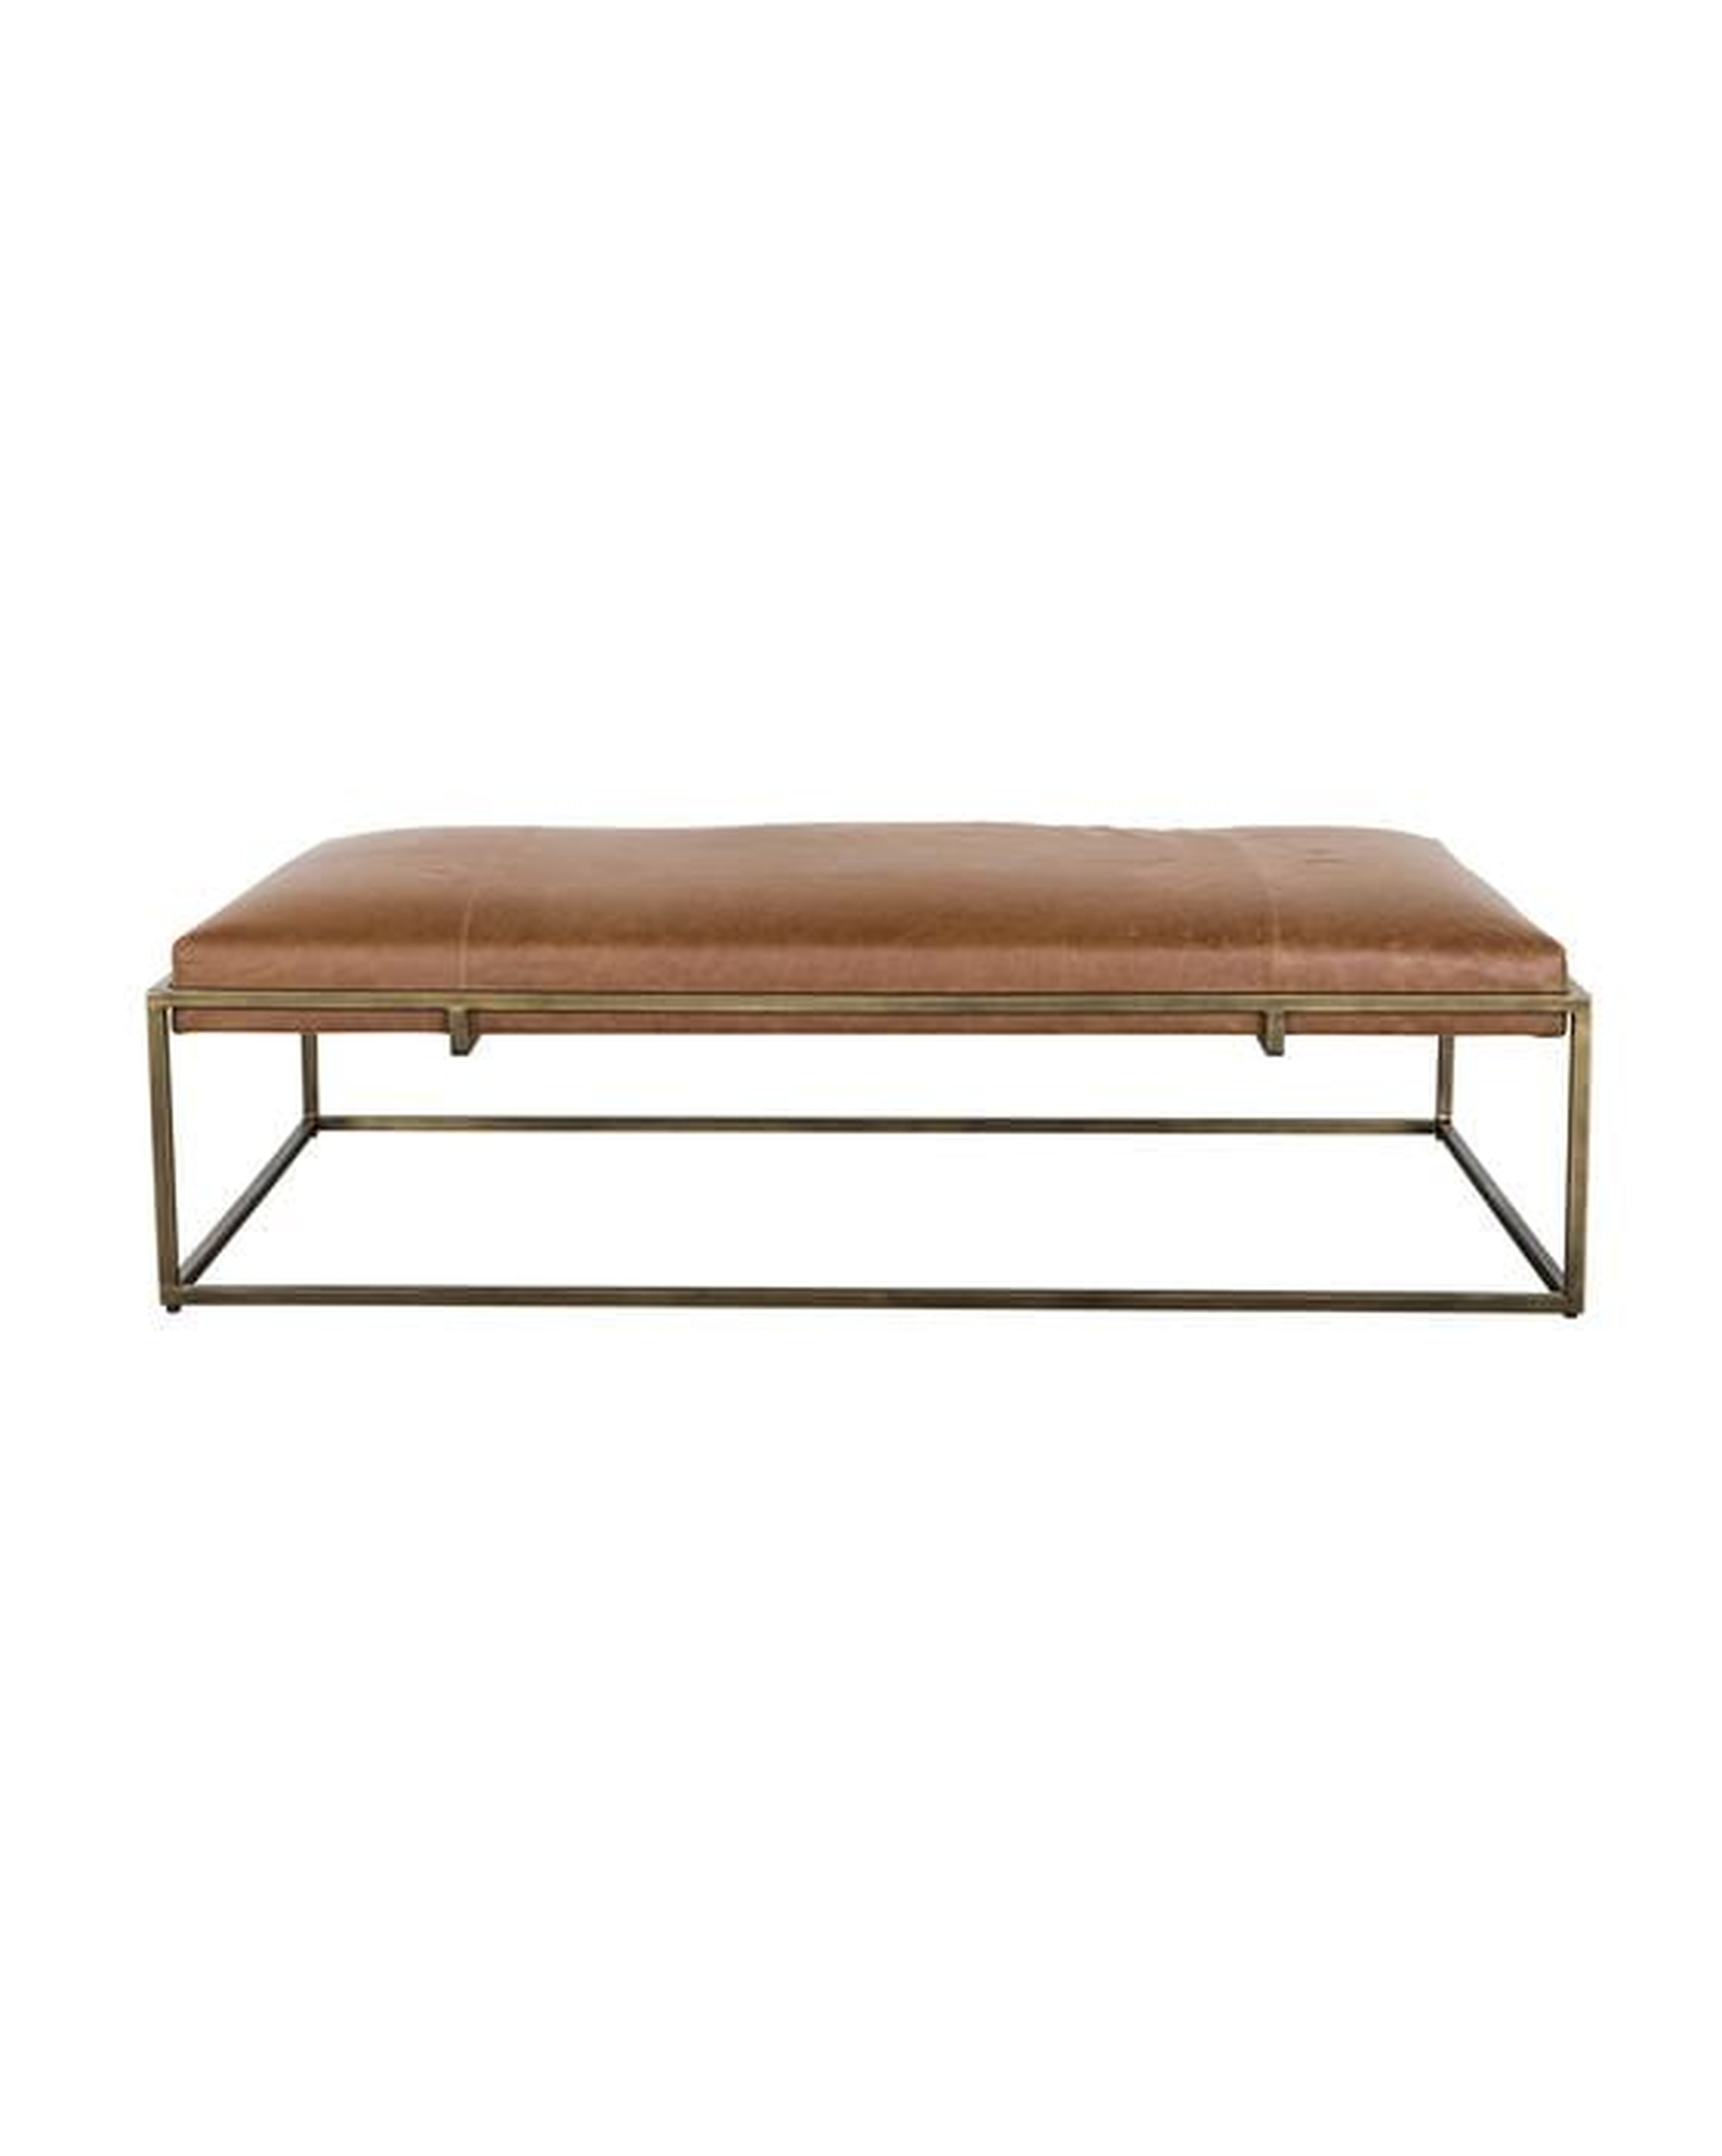 Harlow Leather Bench - McGee & Co.